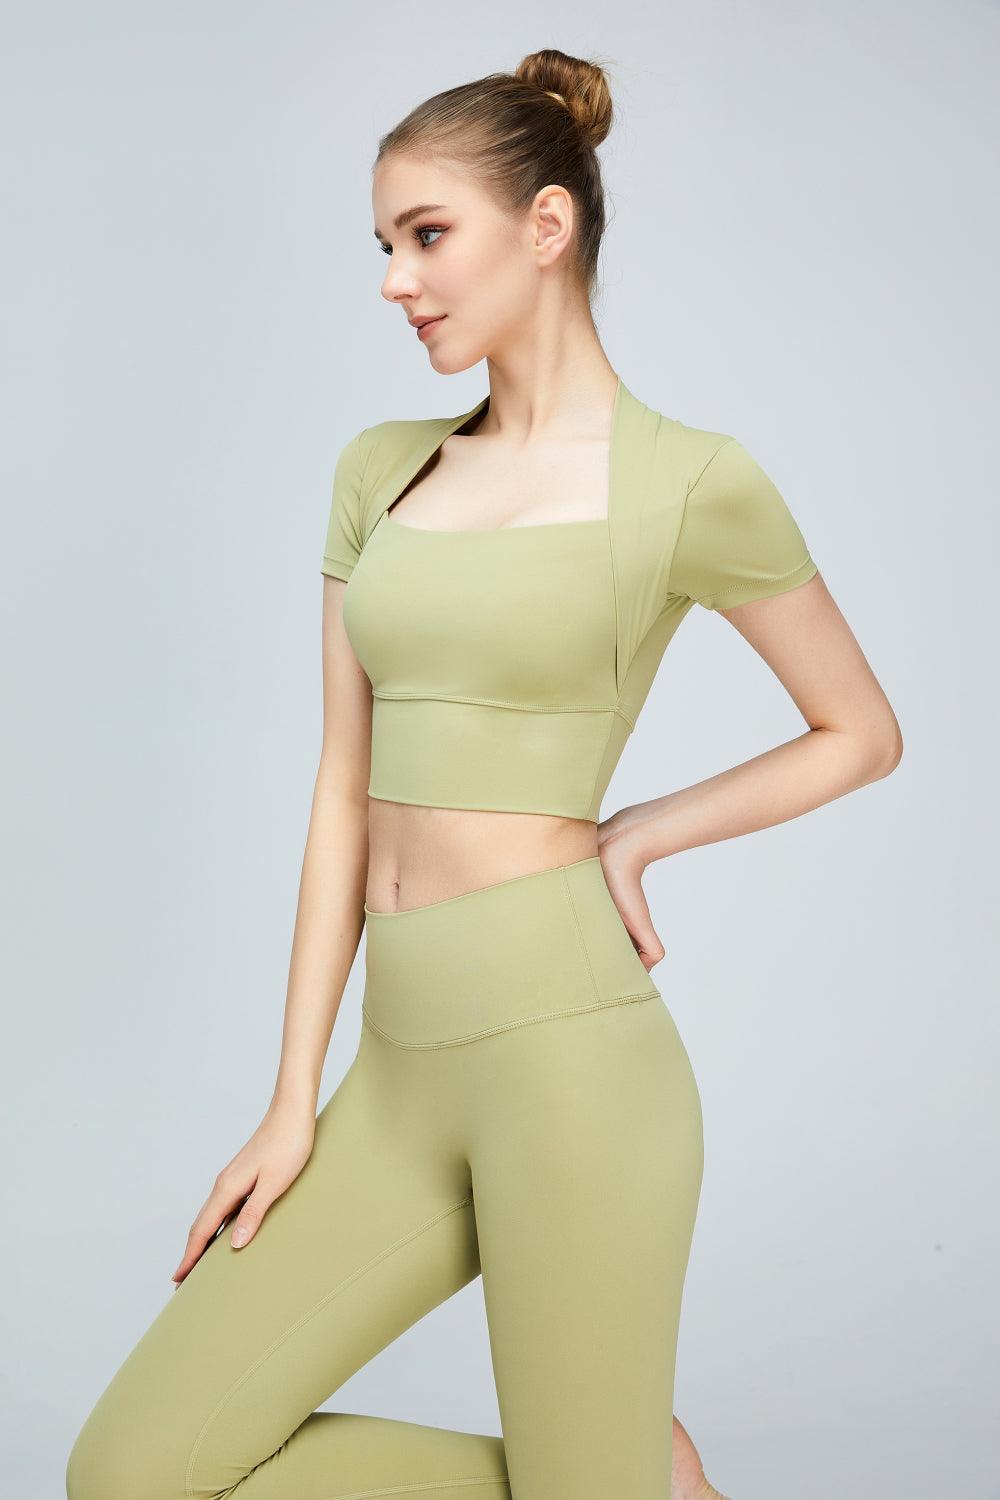 Short Sleeve Cropped Sports Top - Olive Ave